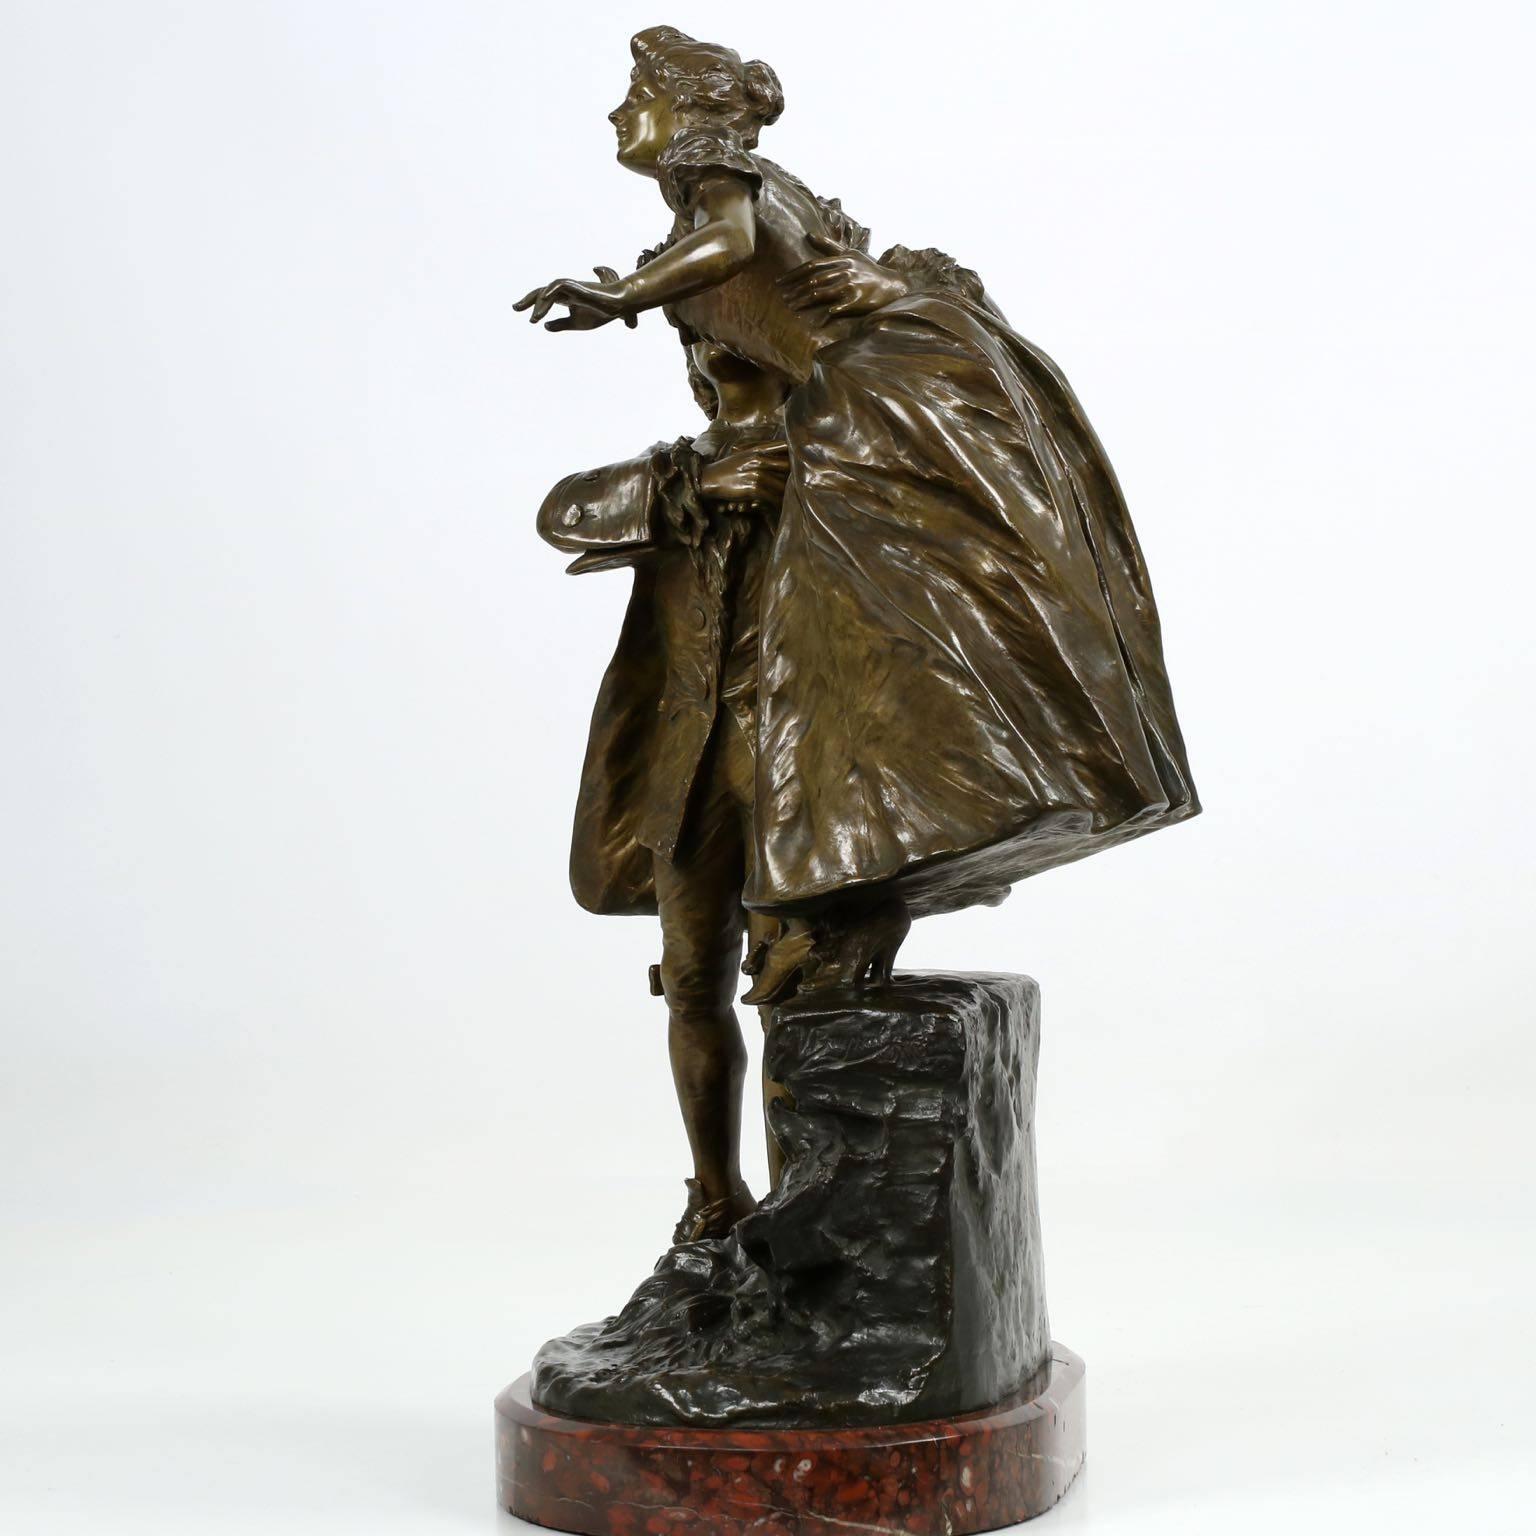 Patinated Tiffany & Co. French School Bronze Sculpture of Courting Couple, circa 1890-1910